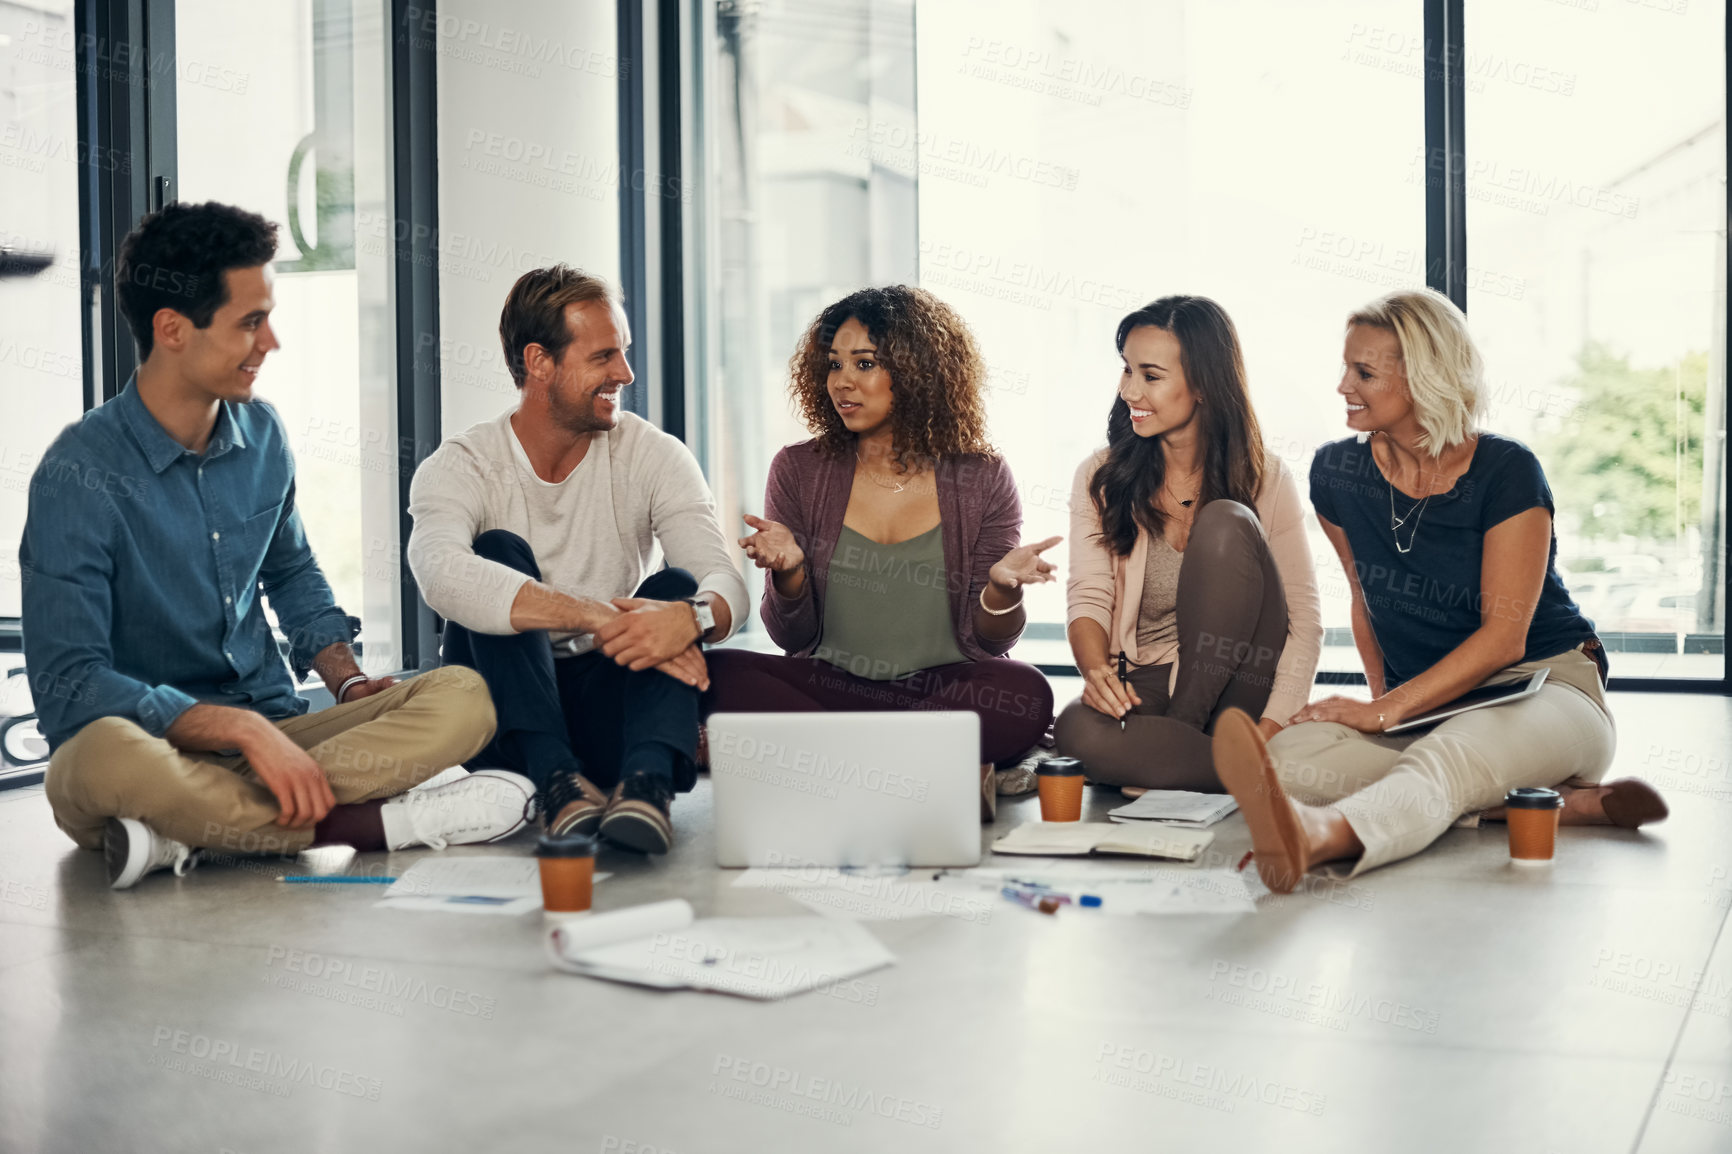 Buy stock photo Shot of a group of designers brainstorming on the floor in an office